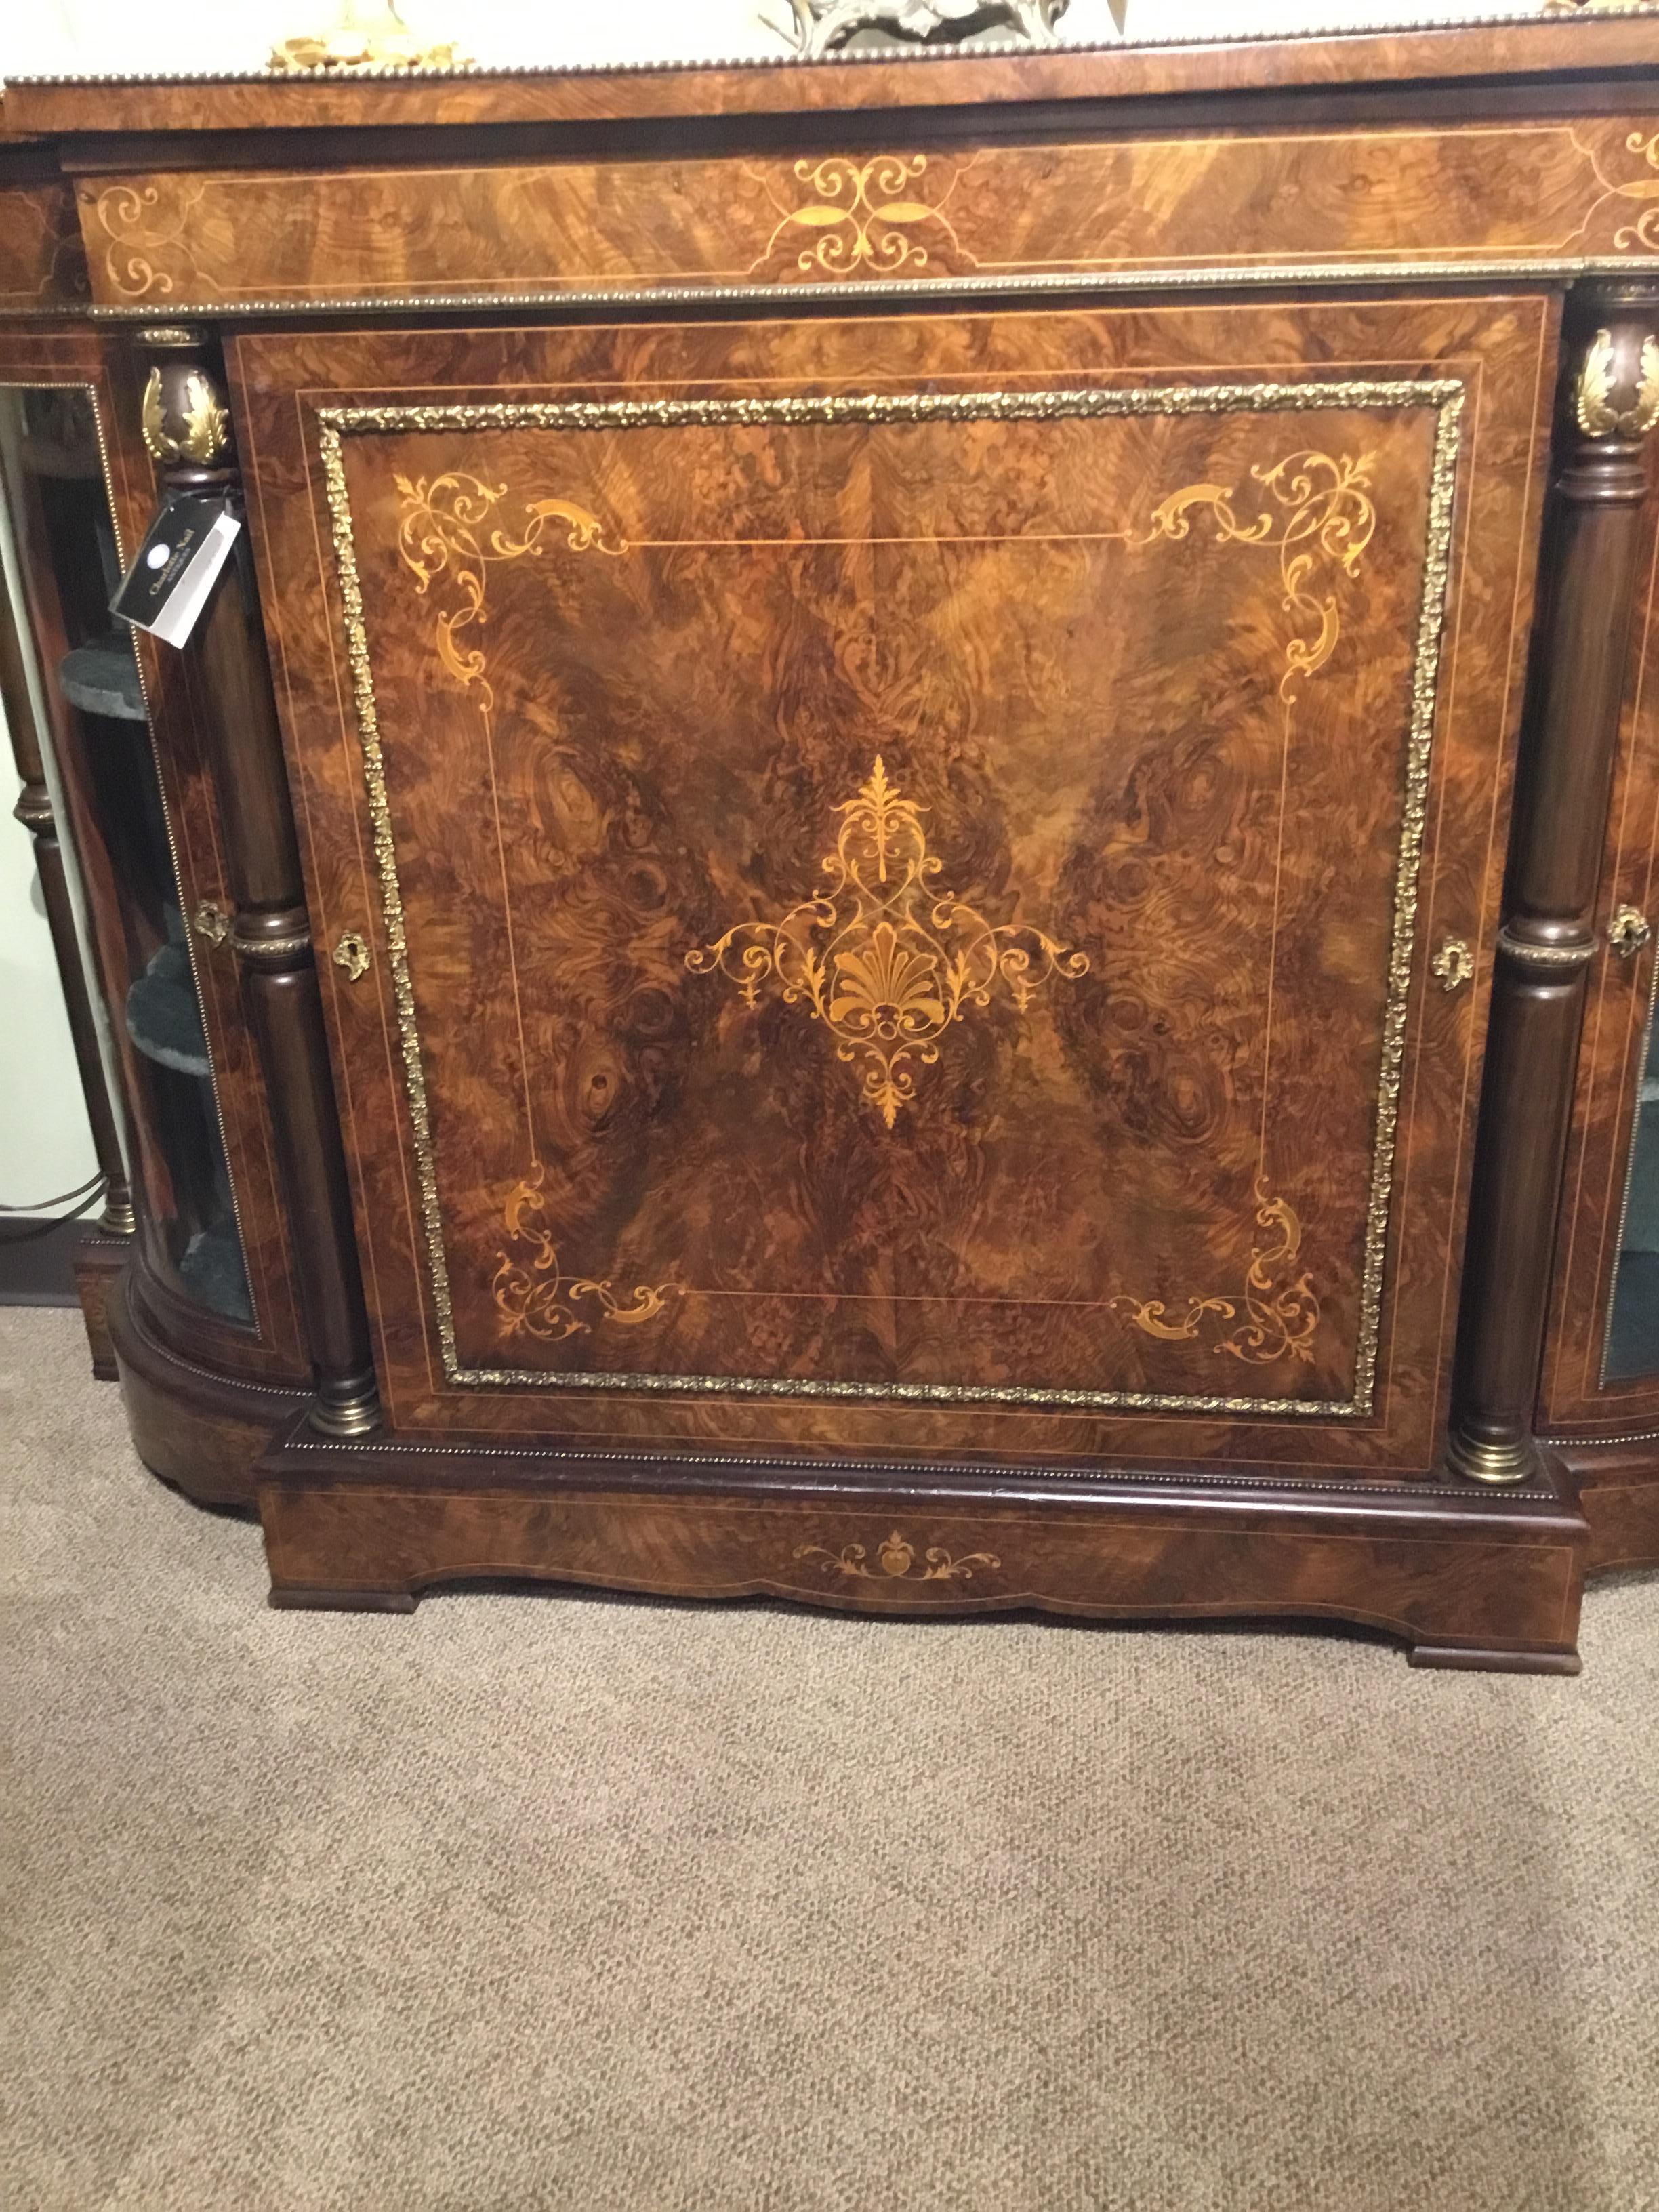 Edwardian Style Antique Cabinet, 19th Century Burled Walnut with Marquetry 1